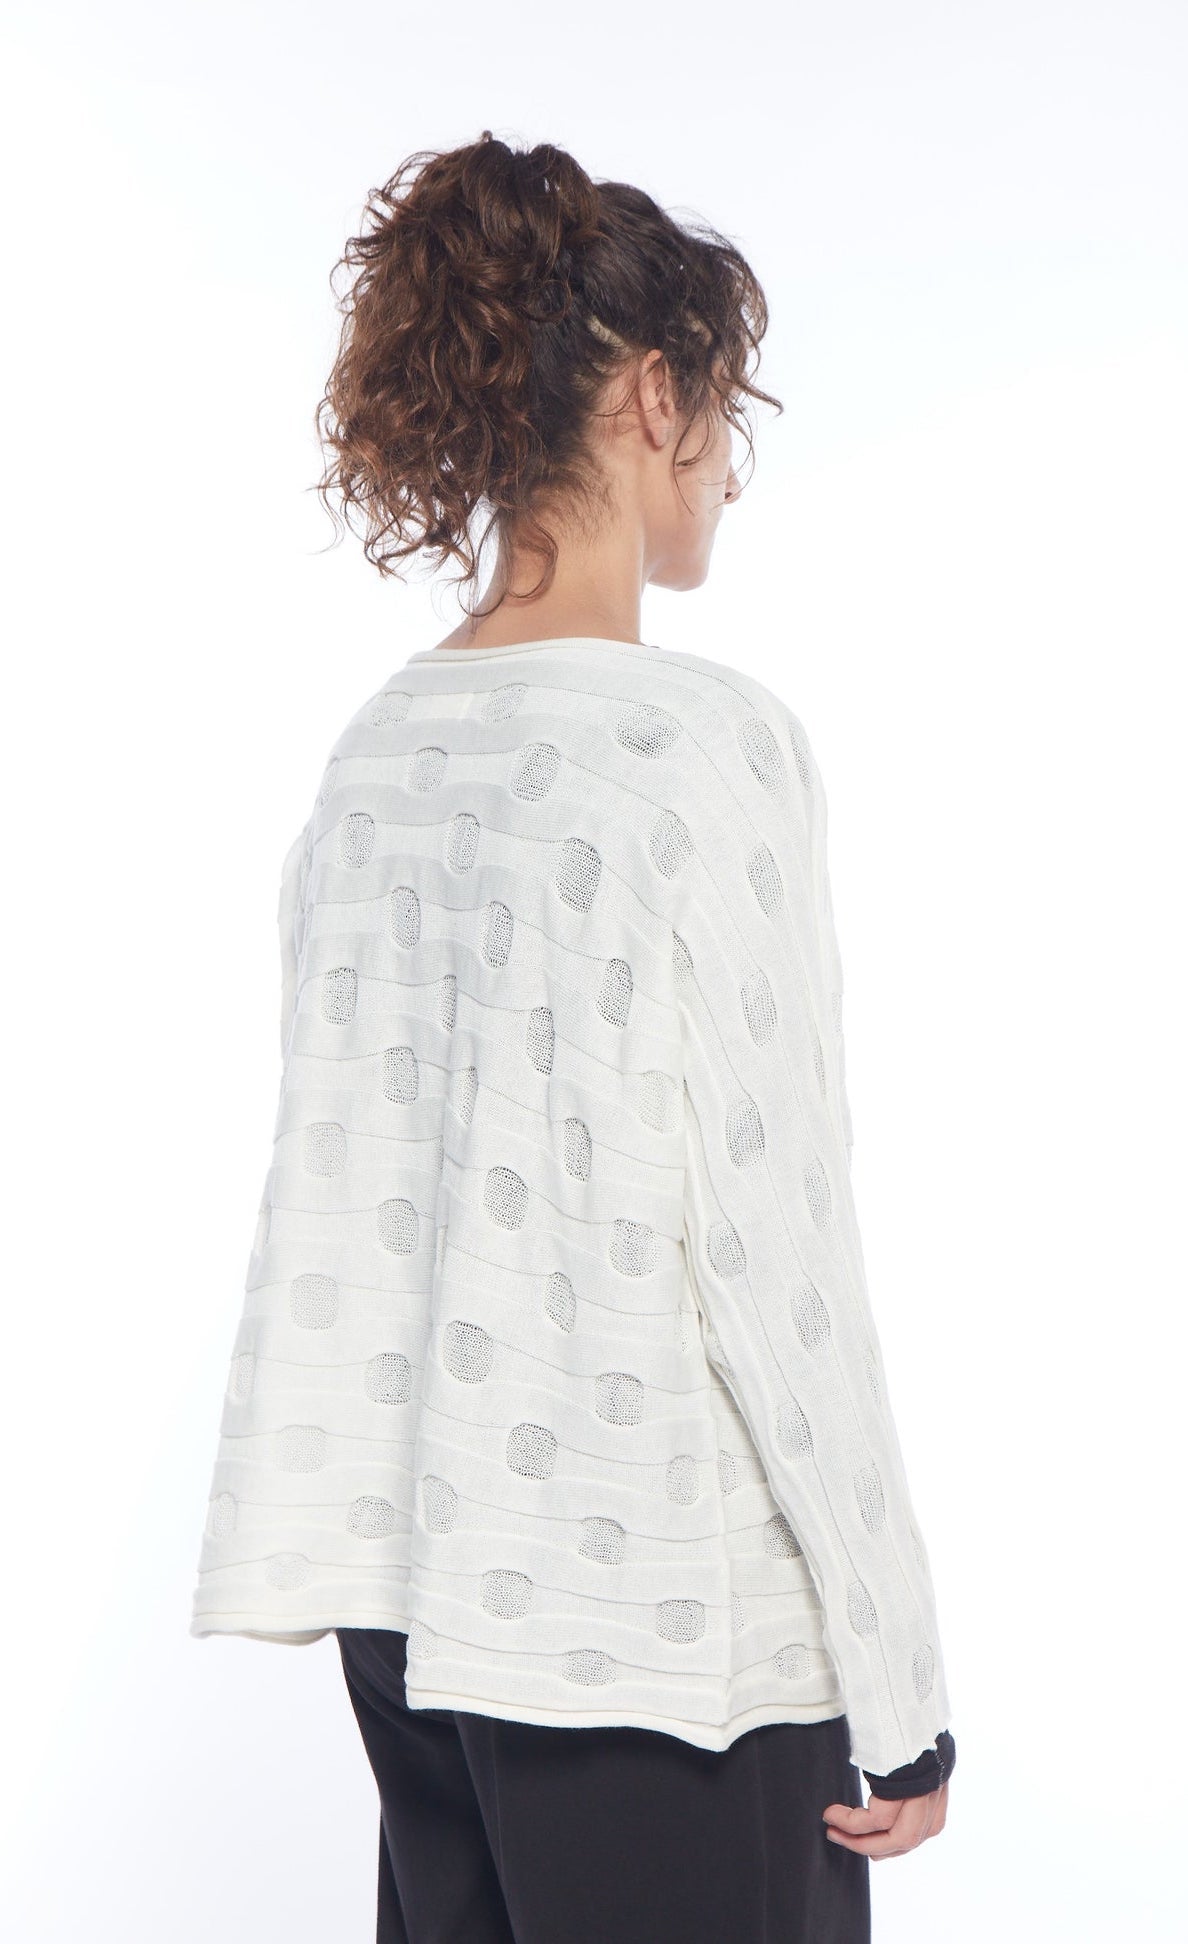 Back top half view of a woman wearing the mxmatthildur bubble sweater. This sweater features a bubble/jacquard textured fabric print, long sleeves, a boxy shape, and a boat neck.